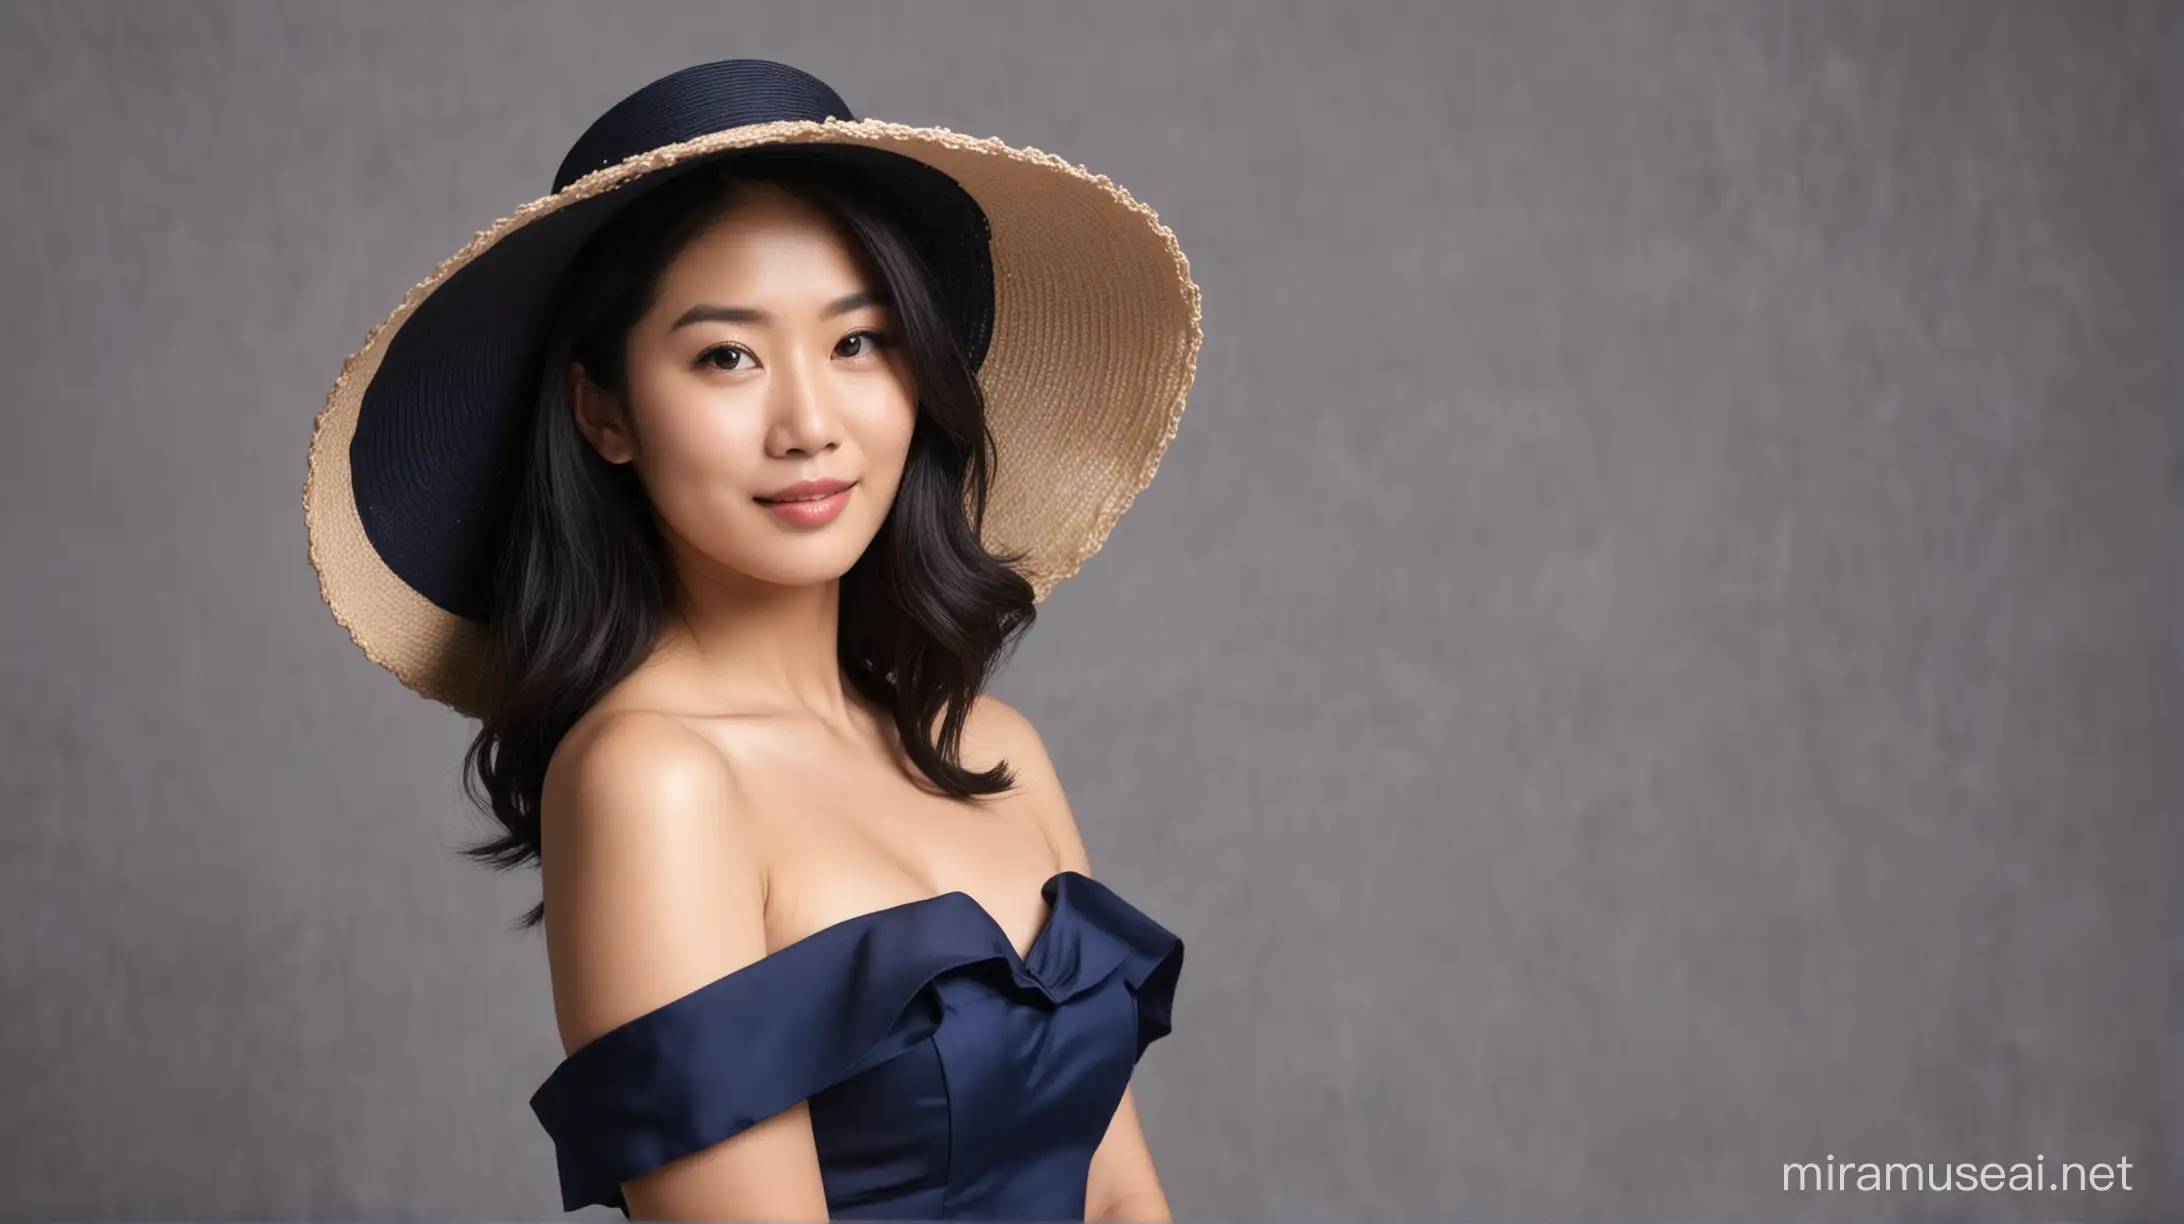 Elegant Asian Woman in Dark Blue Dress and Wide Black Hat with Scenic Background